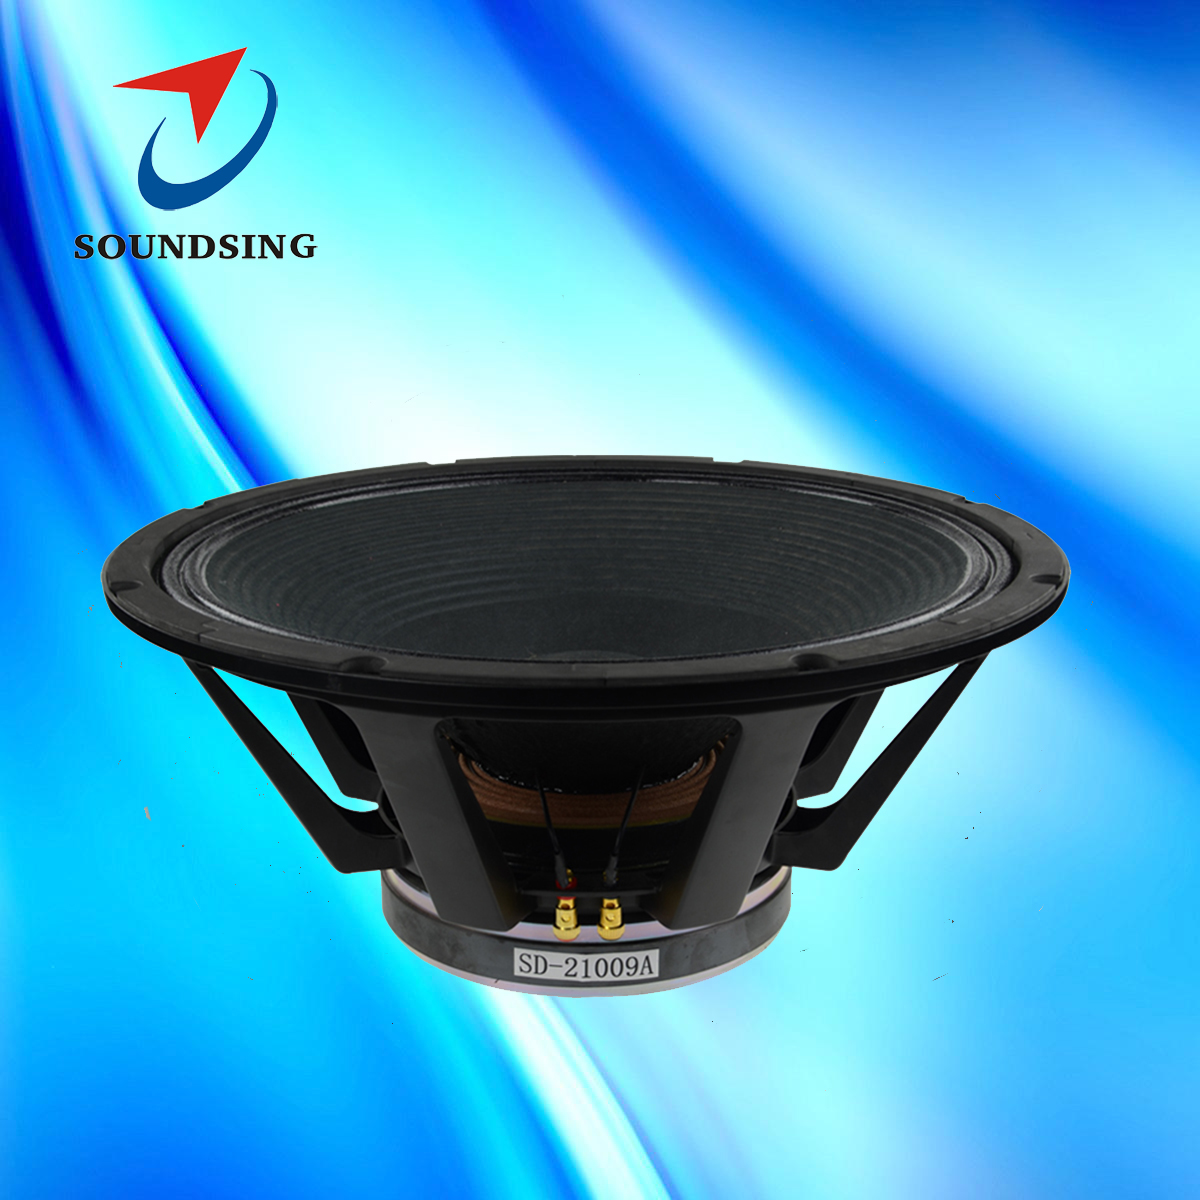 21 inch subwoofer SD-21009A